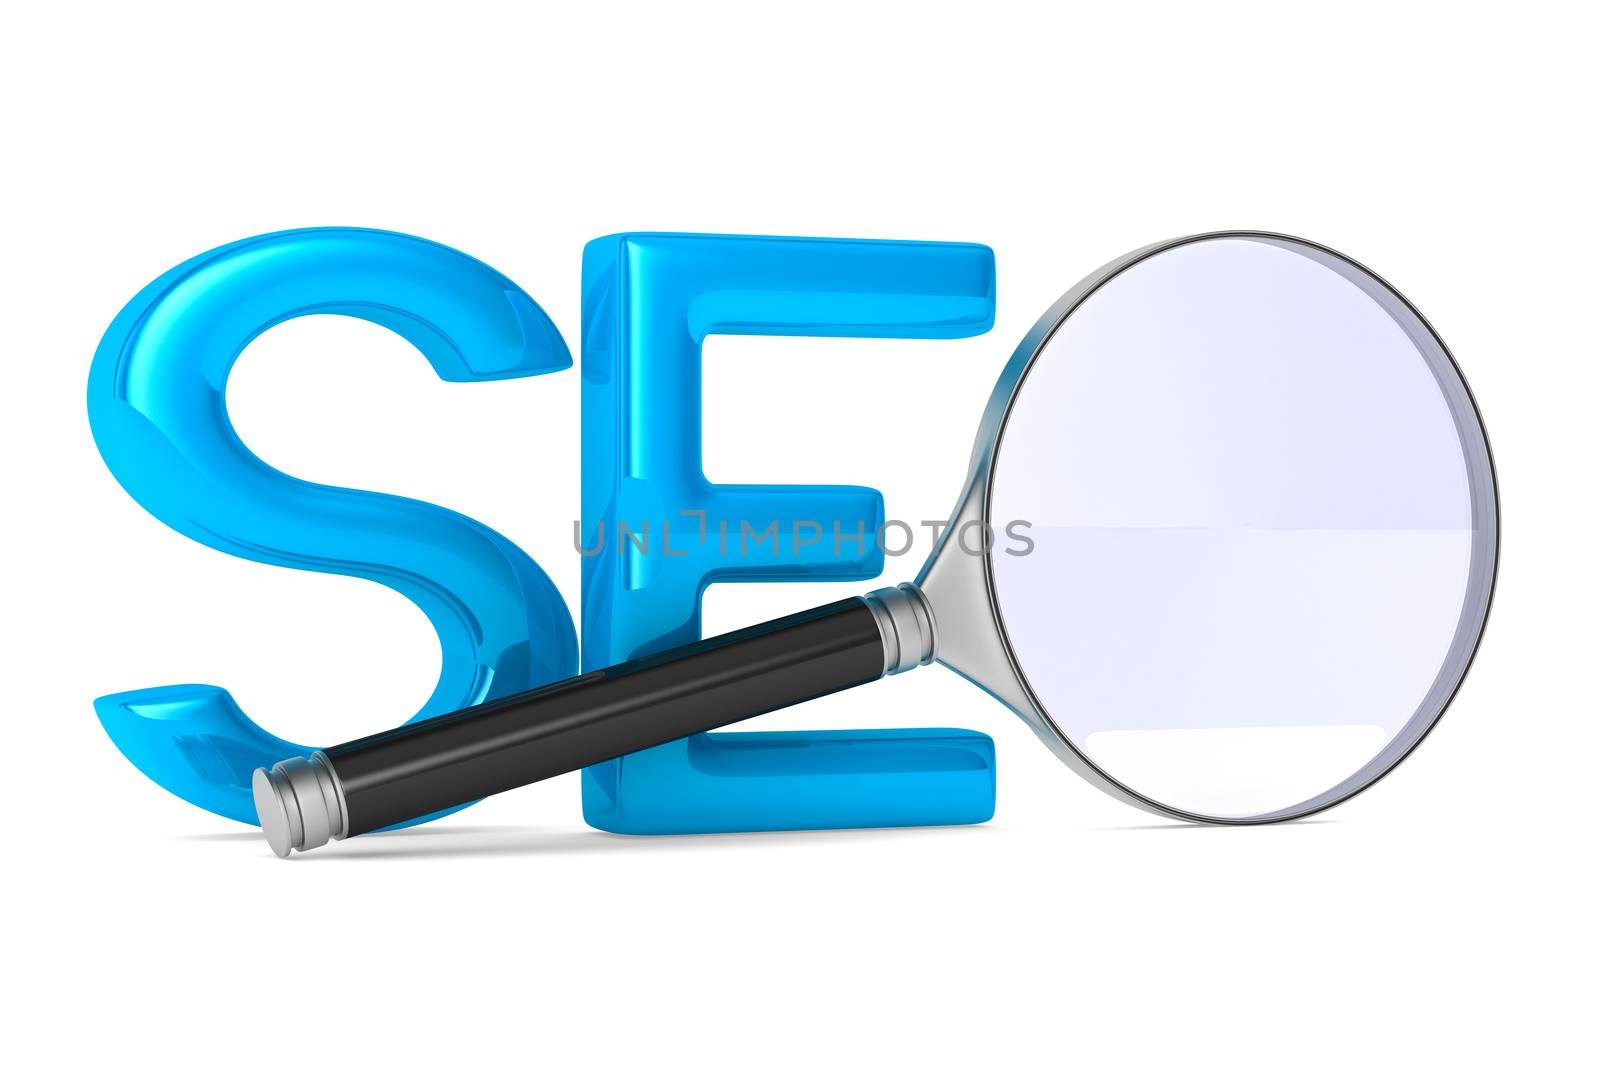 Search Engines Optimization. Isolated 3D image